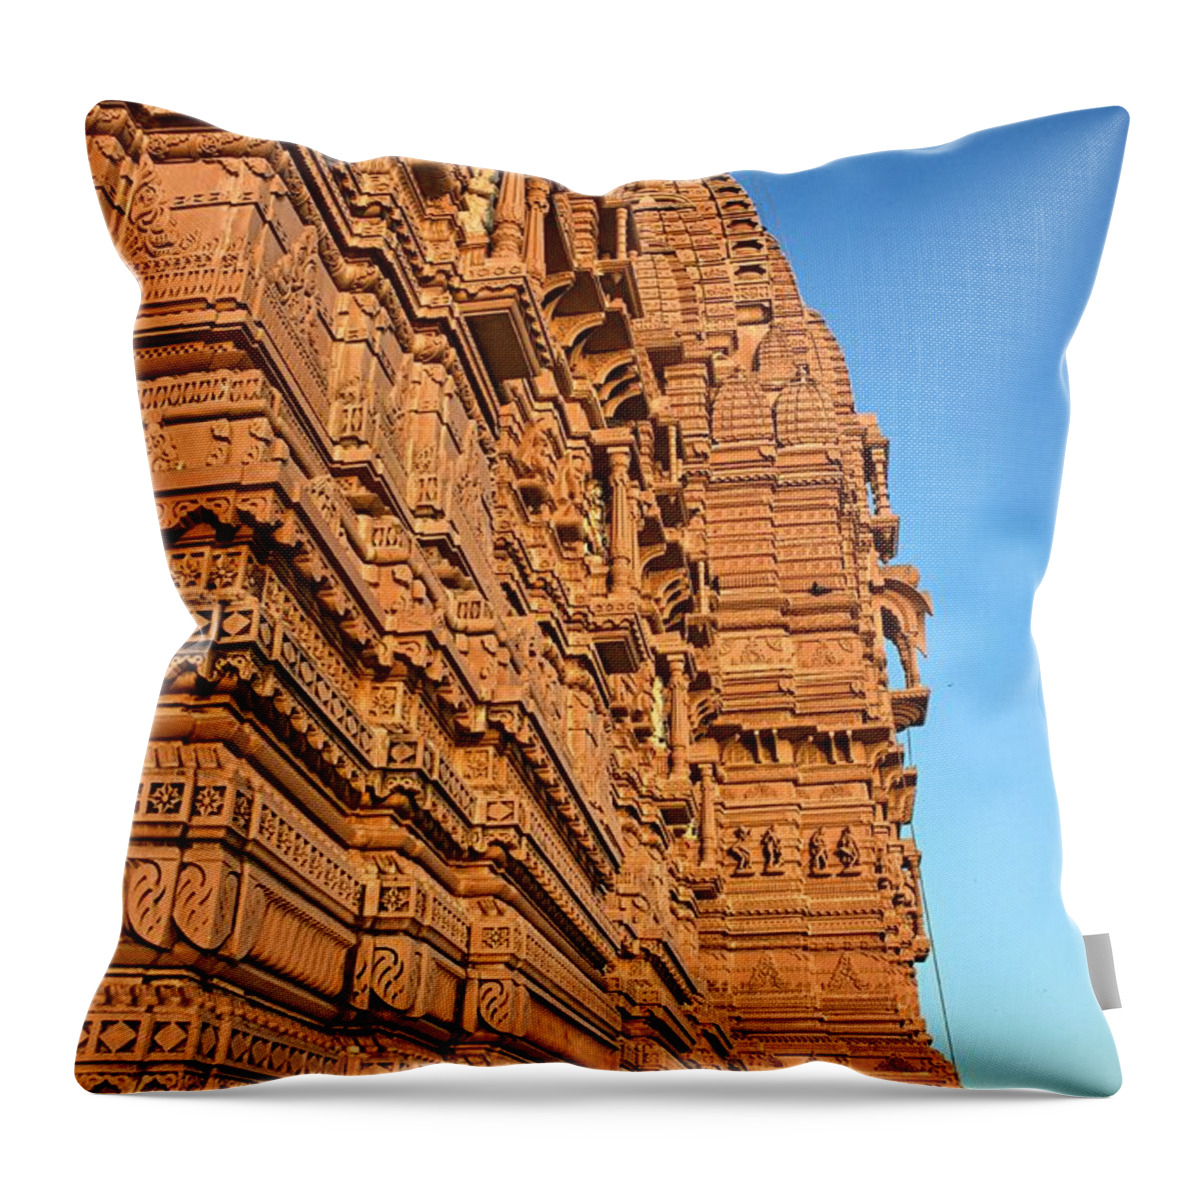 Built Structure Throw Pillow featuring the photograph Bhadreshwar Jain Temple During Sunset by © Jayesh Bheda